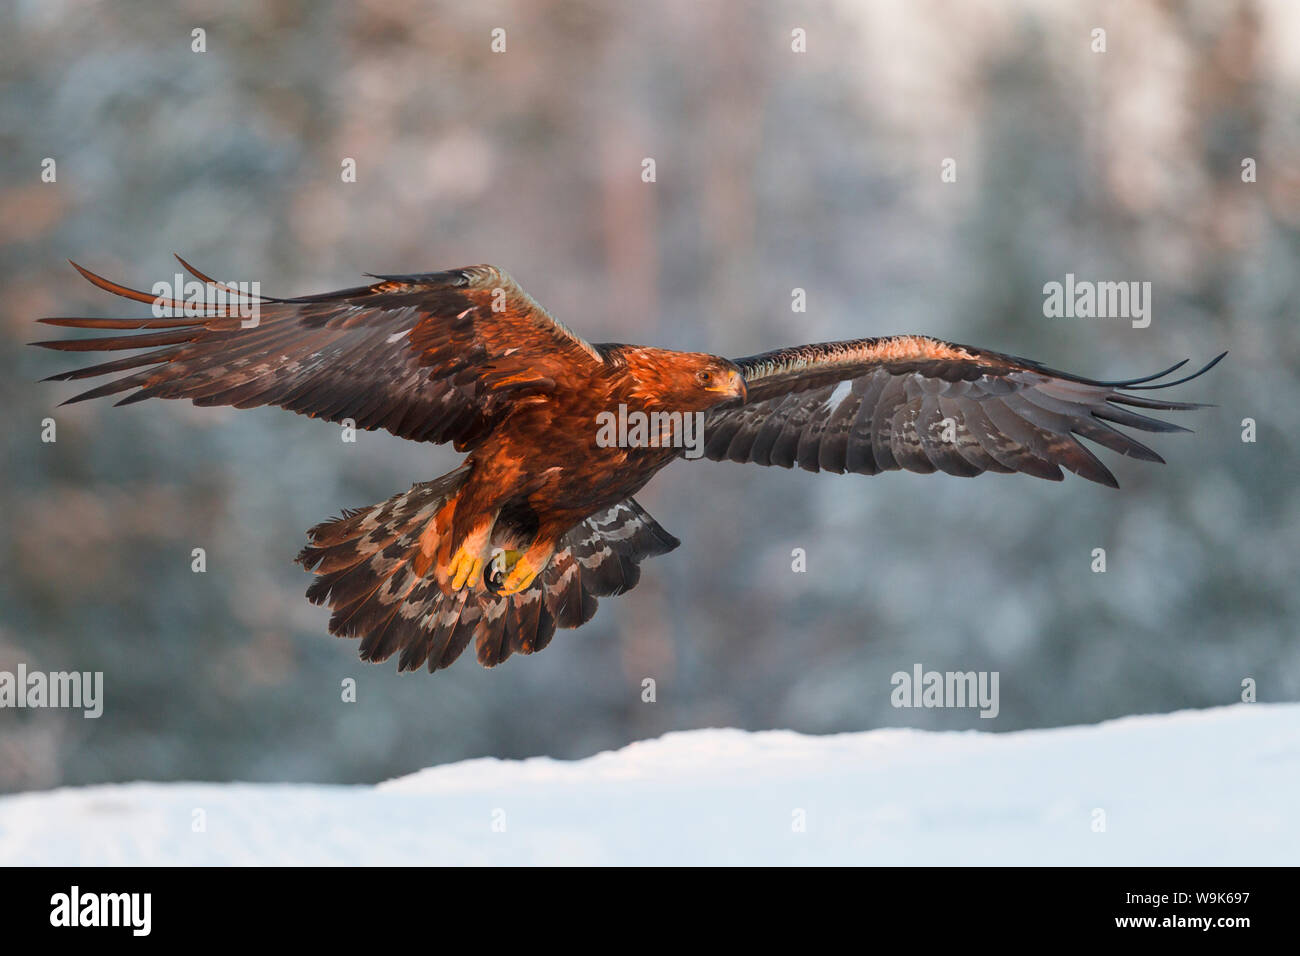 Golden eagle (Aquila chrysaetos) takes flight in golden late afternoon winter light above the snow, Taiga Forest, Finland, Scandinavia, Europe Stock Photo